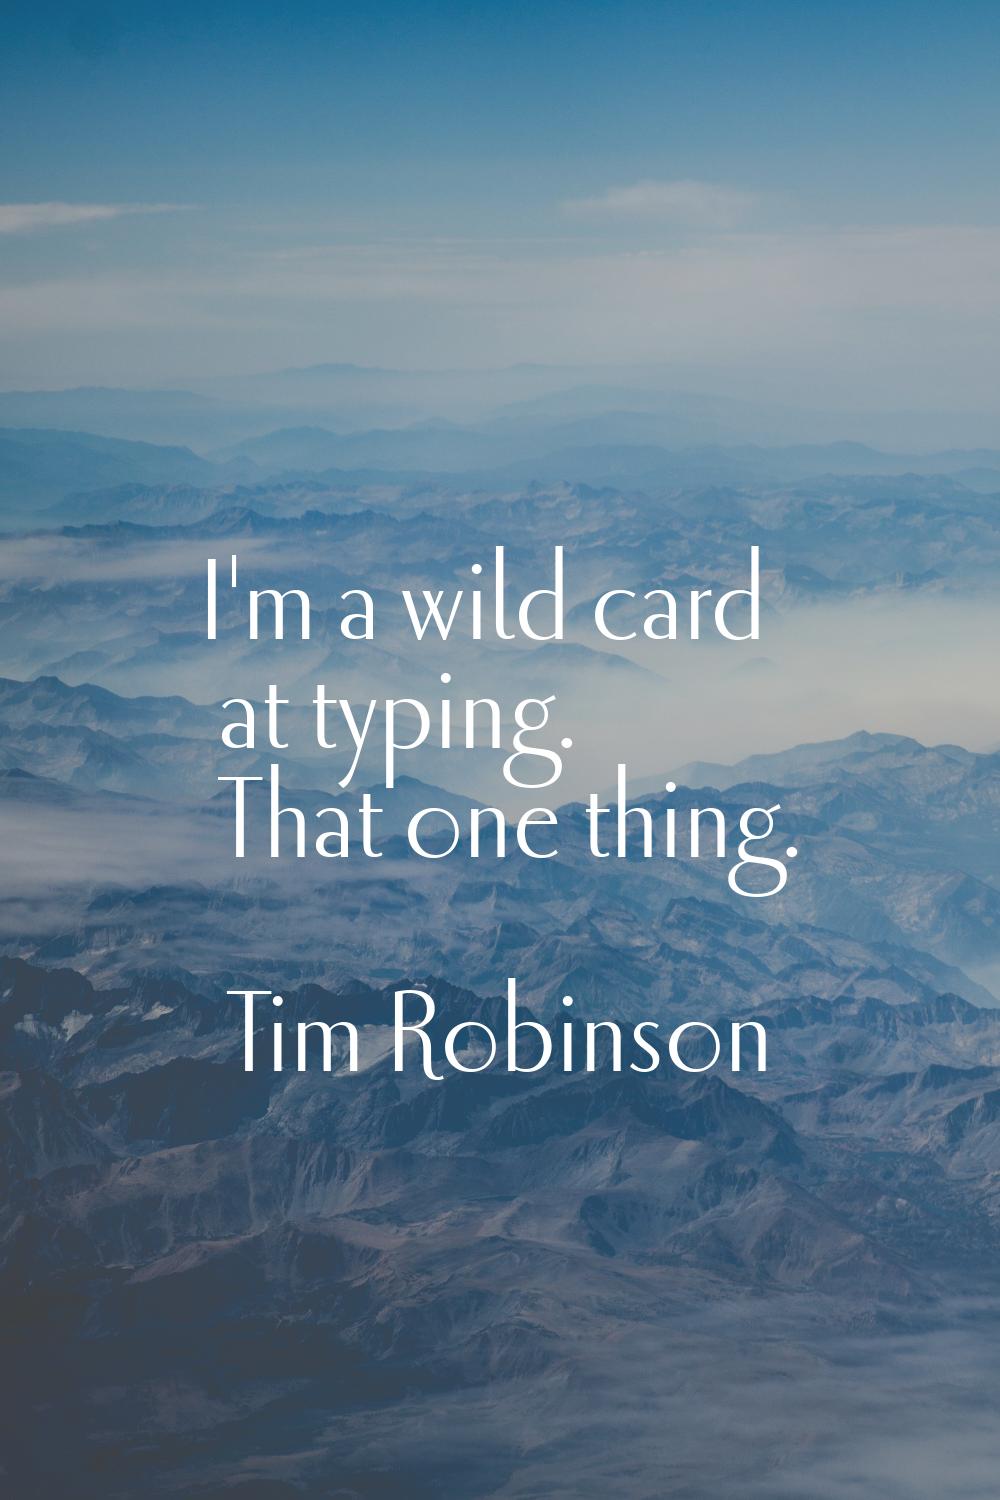 I'm a wild card at typing. That one thing.